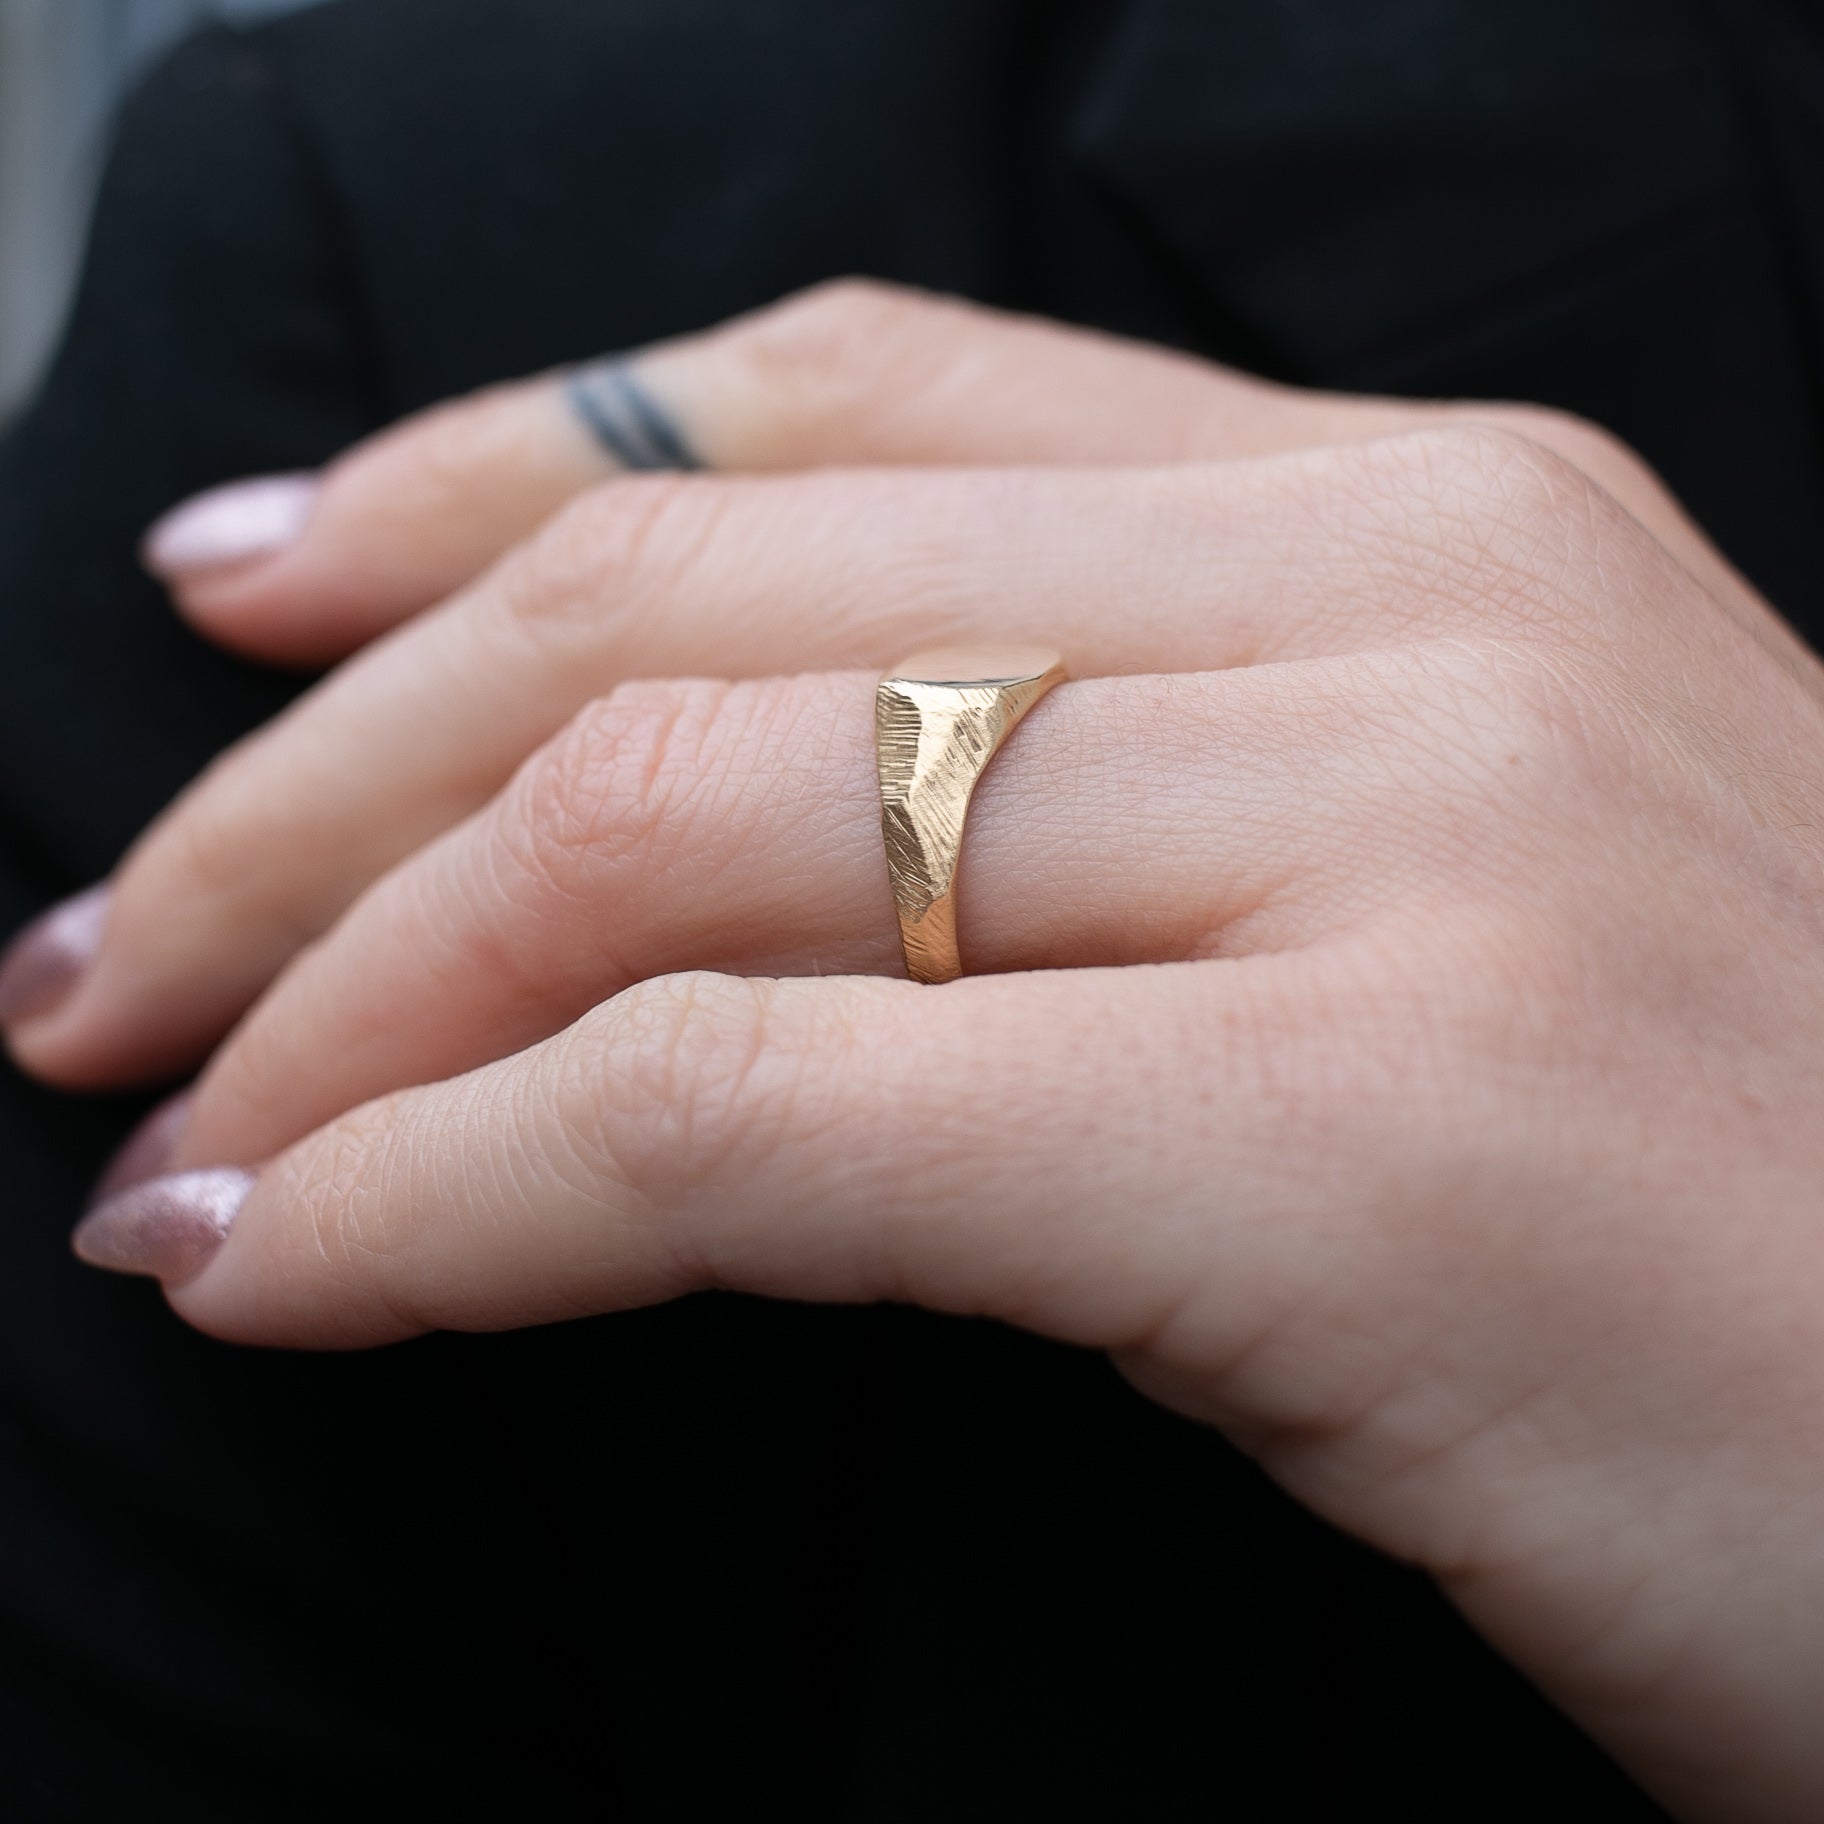 Handmade petite carved signet ring in 18kt yellow gold.